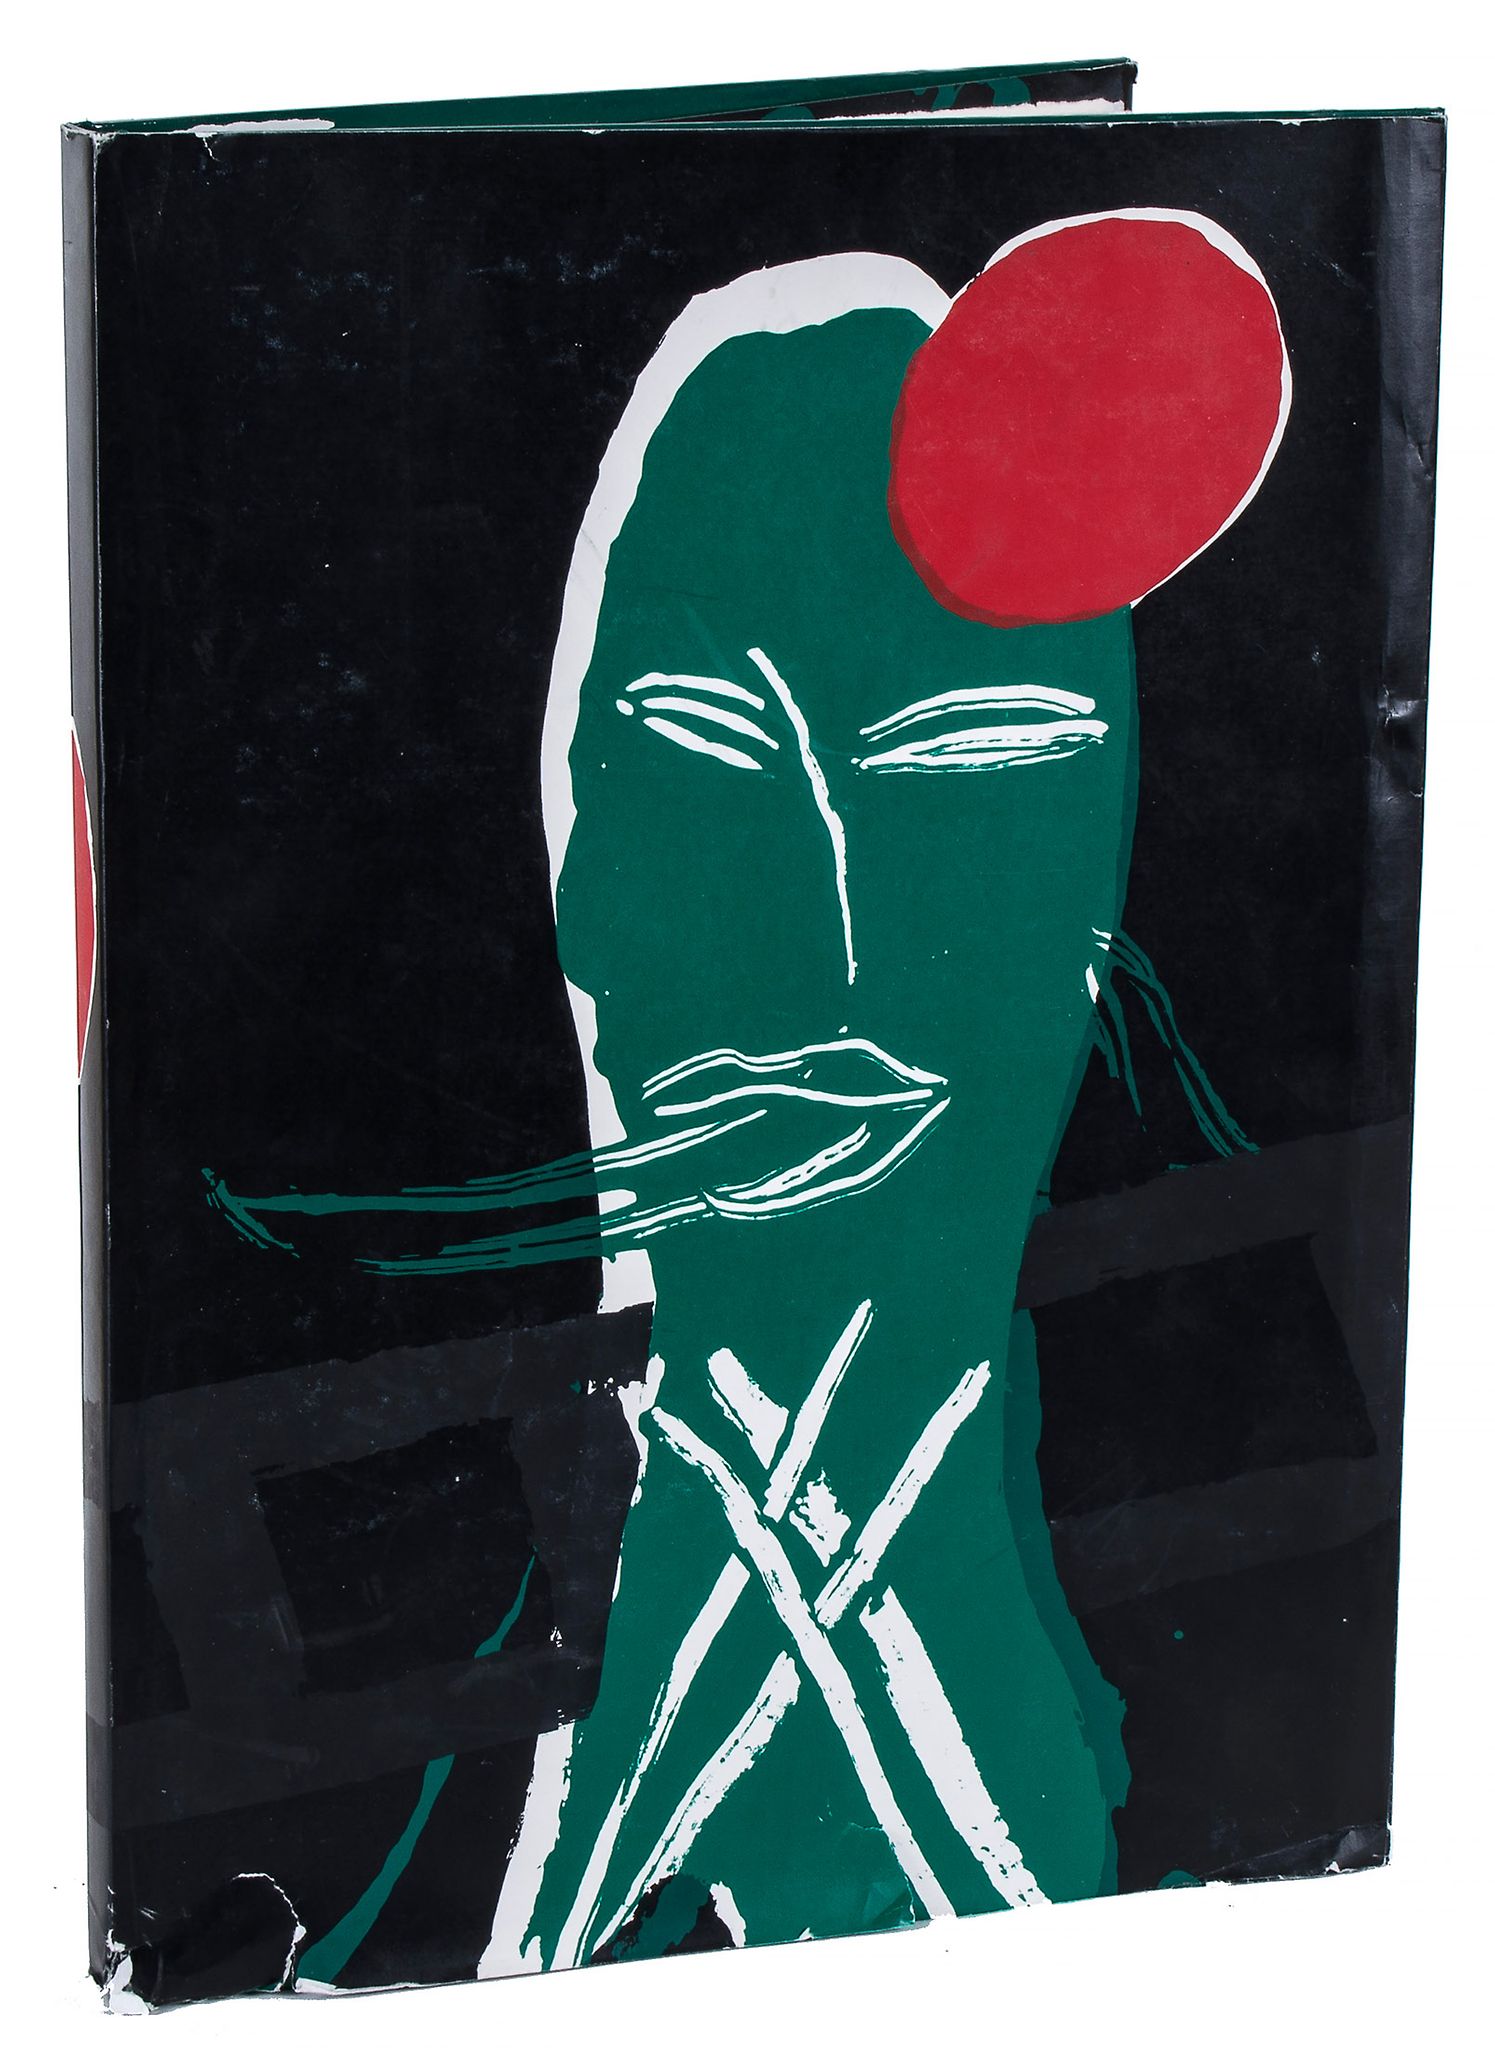 Bruce McLean (b.1944) - Dream Work the book, 1985, comprising 23 screenprints in colours, this